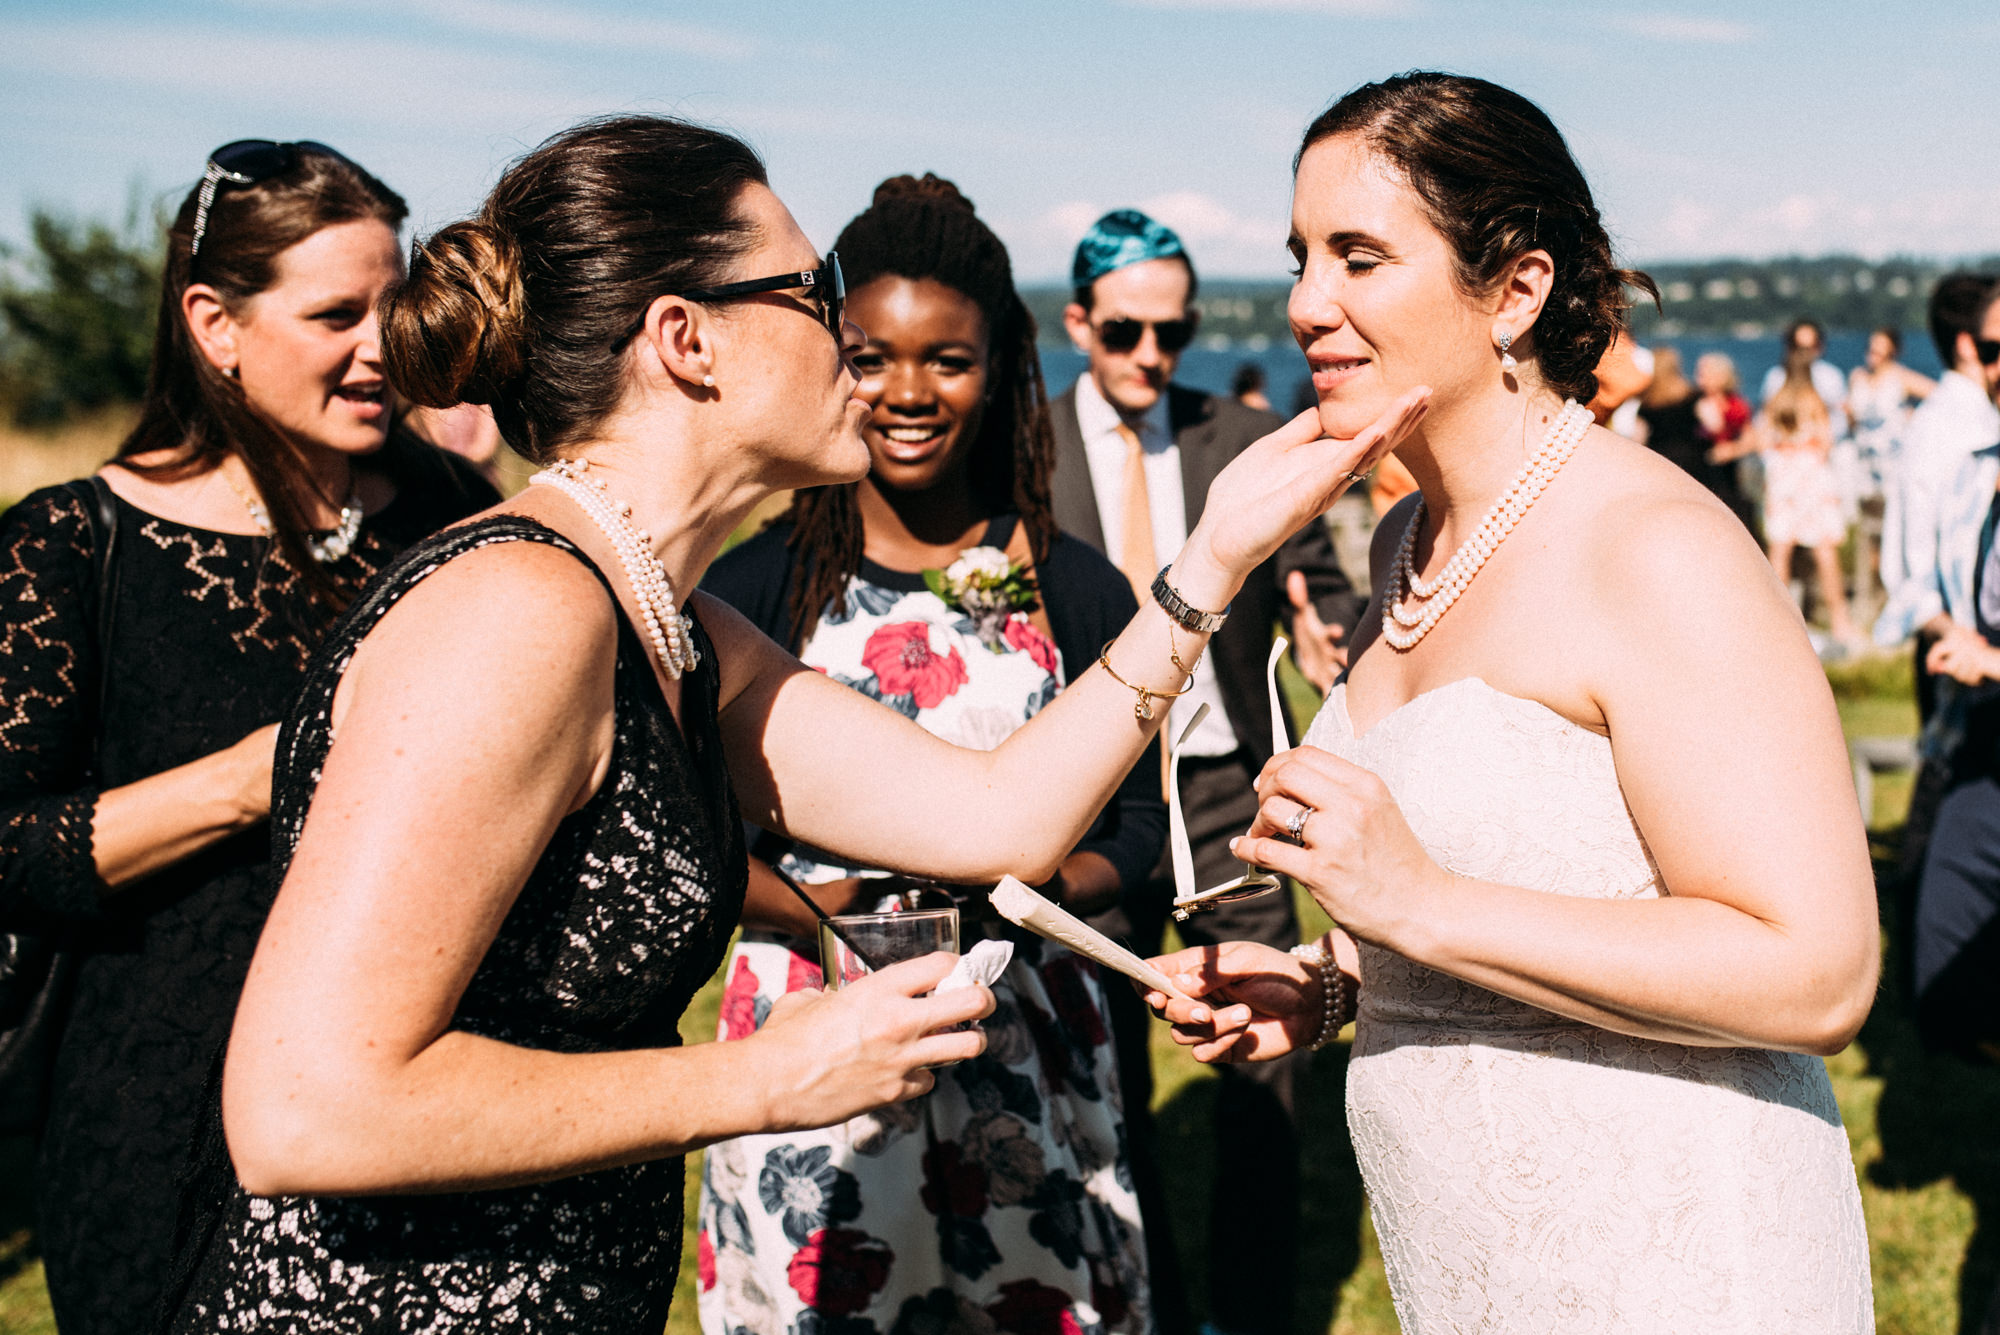 Guests and family greet the newlyweds at their cocktail reception at the Seattle Tennis Club. Summer 2016. Photo by Seattle Wedding Photographers Jennifer Tai Photo Artistry.